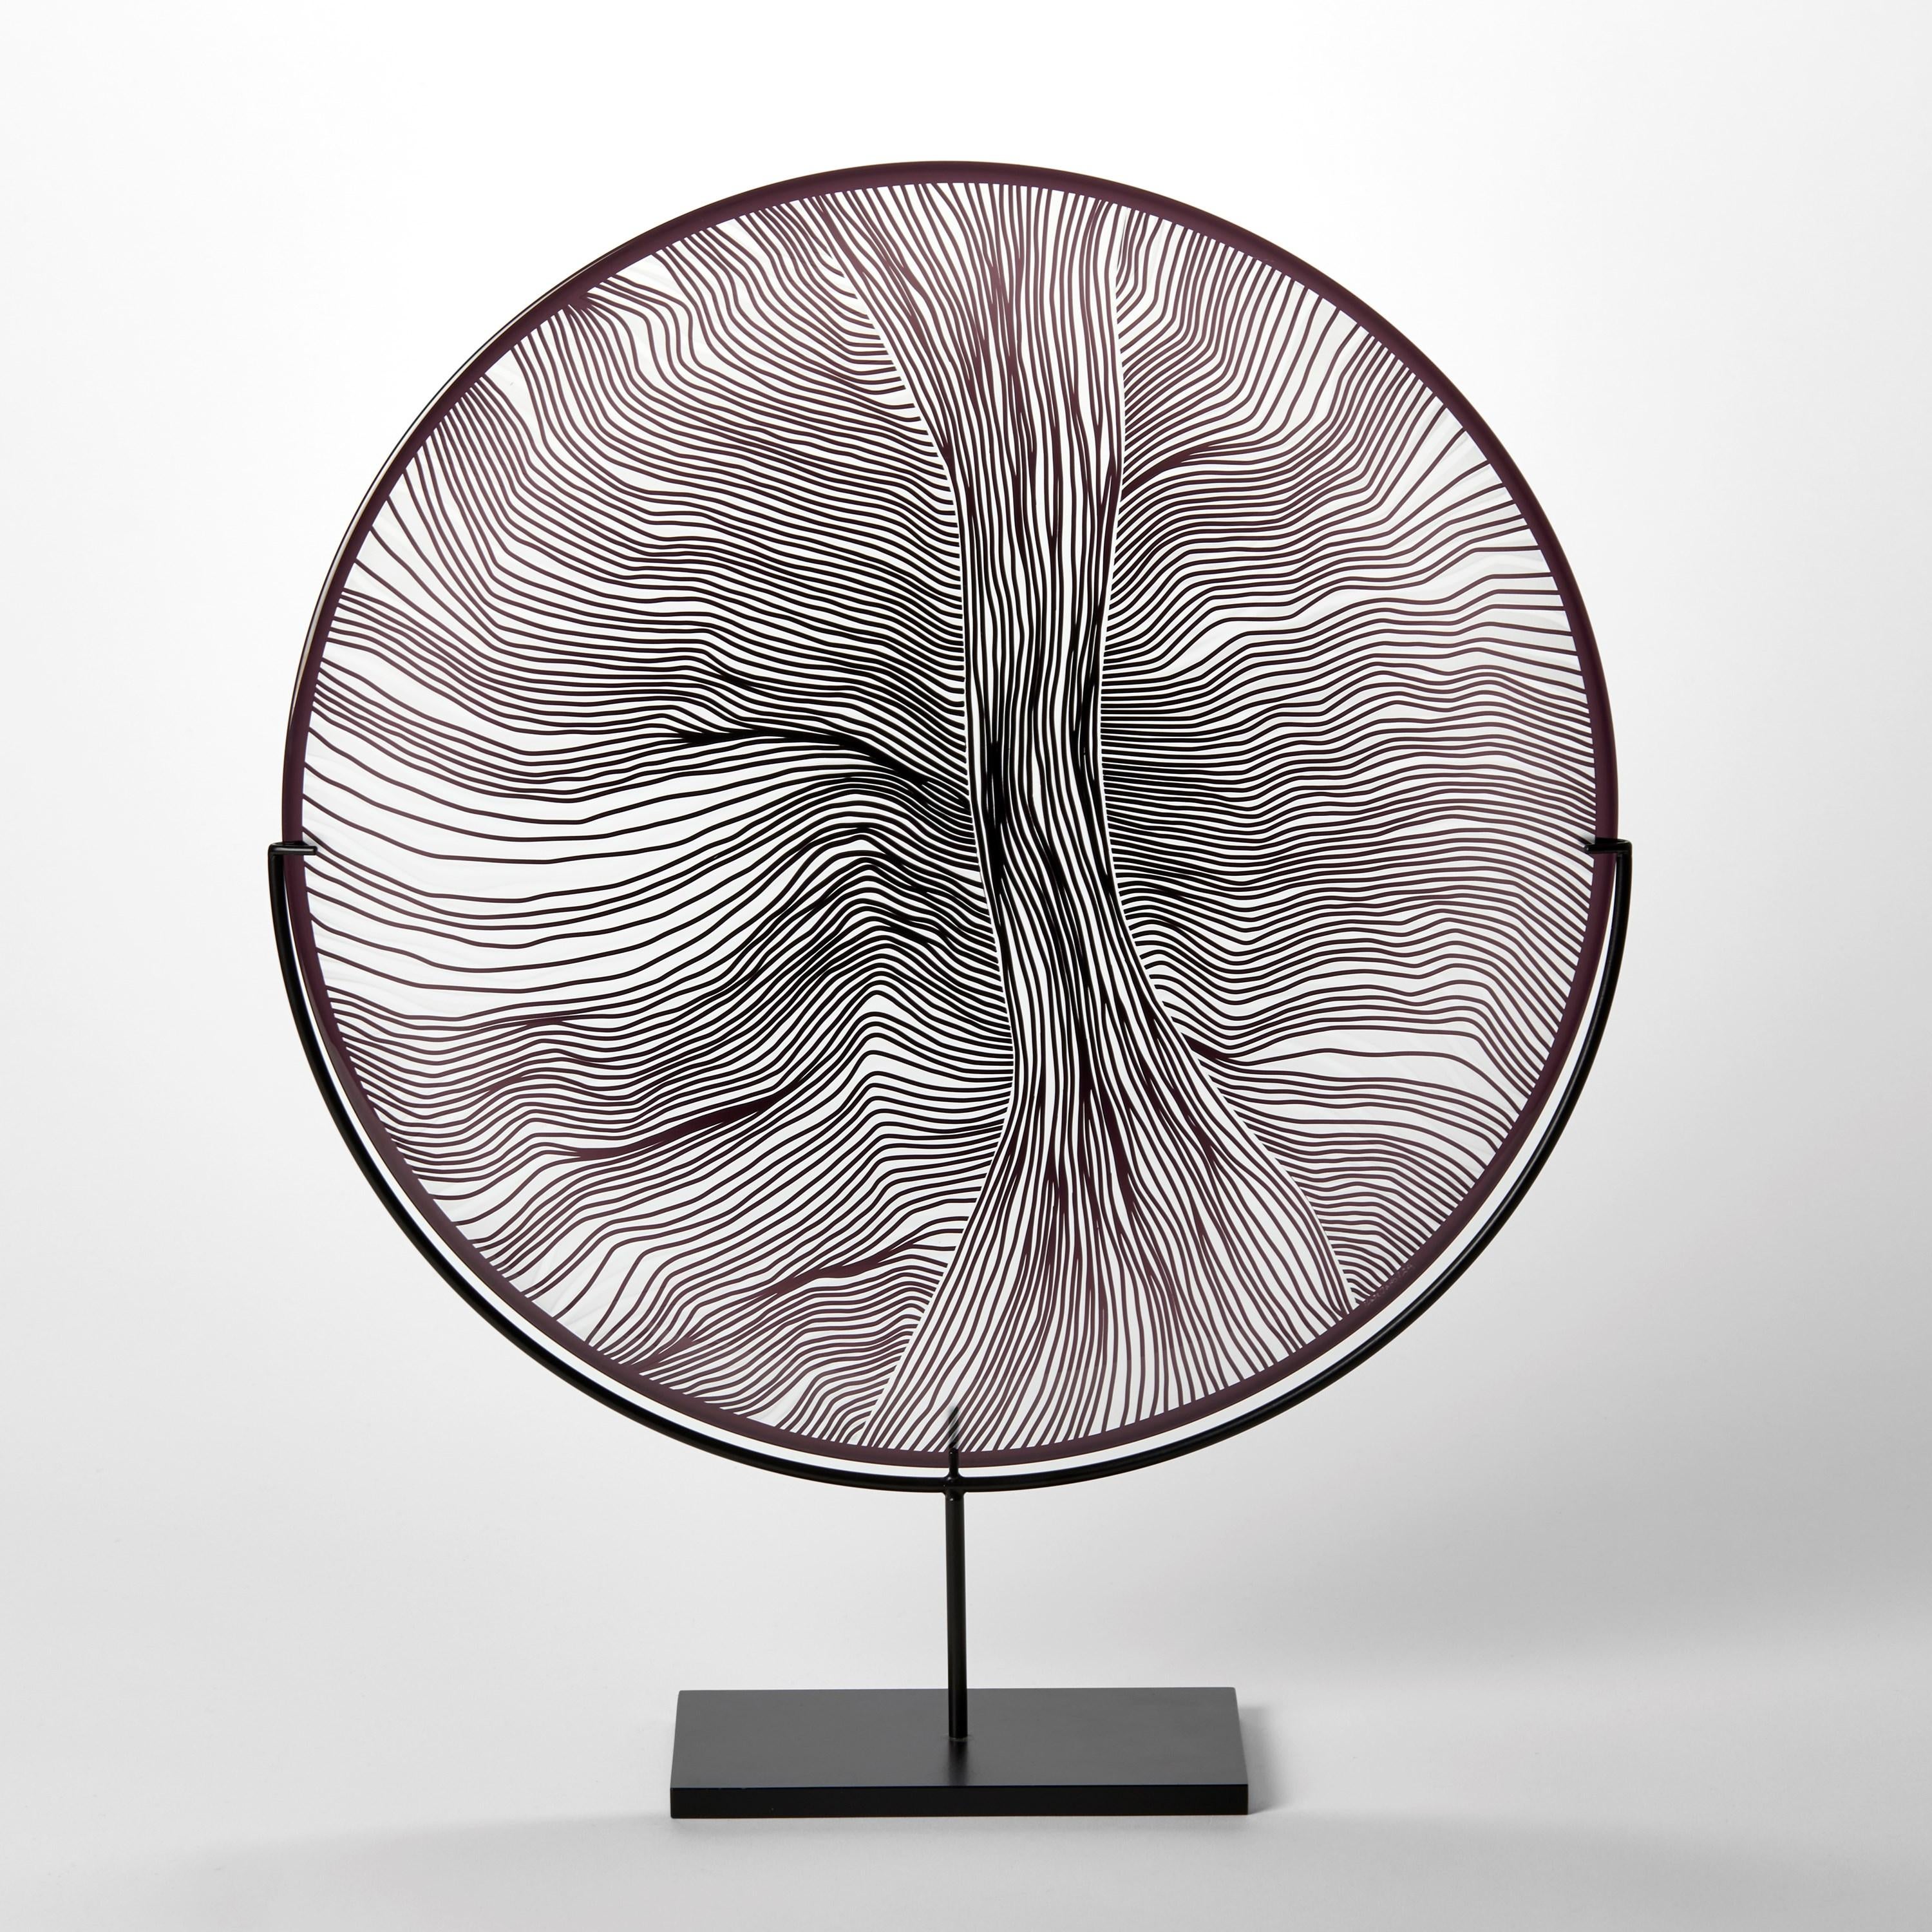 'Solar Storm Monochrome III' is a unique handblown and cut glass artwork by the British artist, Kate Jones of Gillies Jones.

Created with Stephen Gillies, with whom Jones makes many works in collaboration, these exquisite sculptural plates are